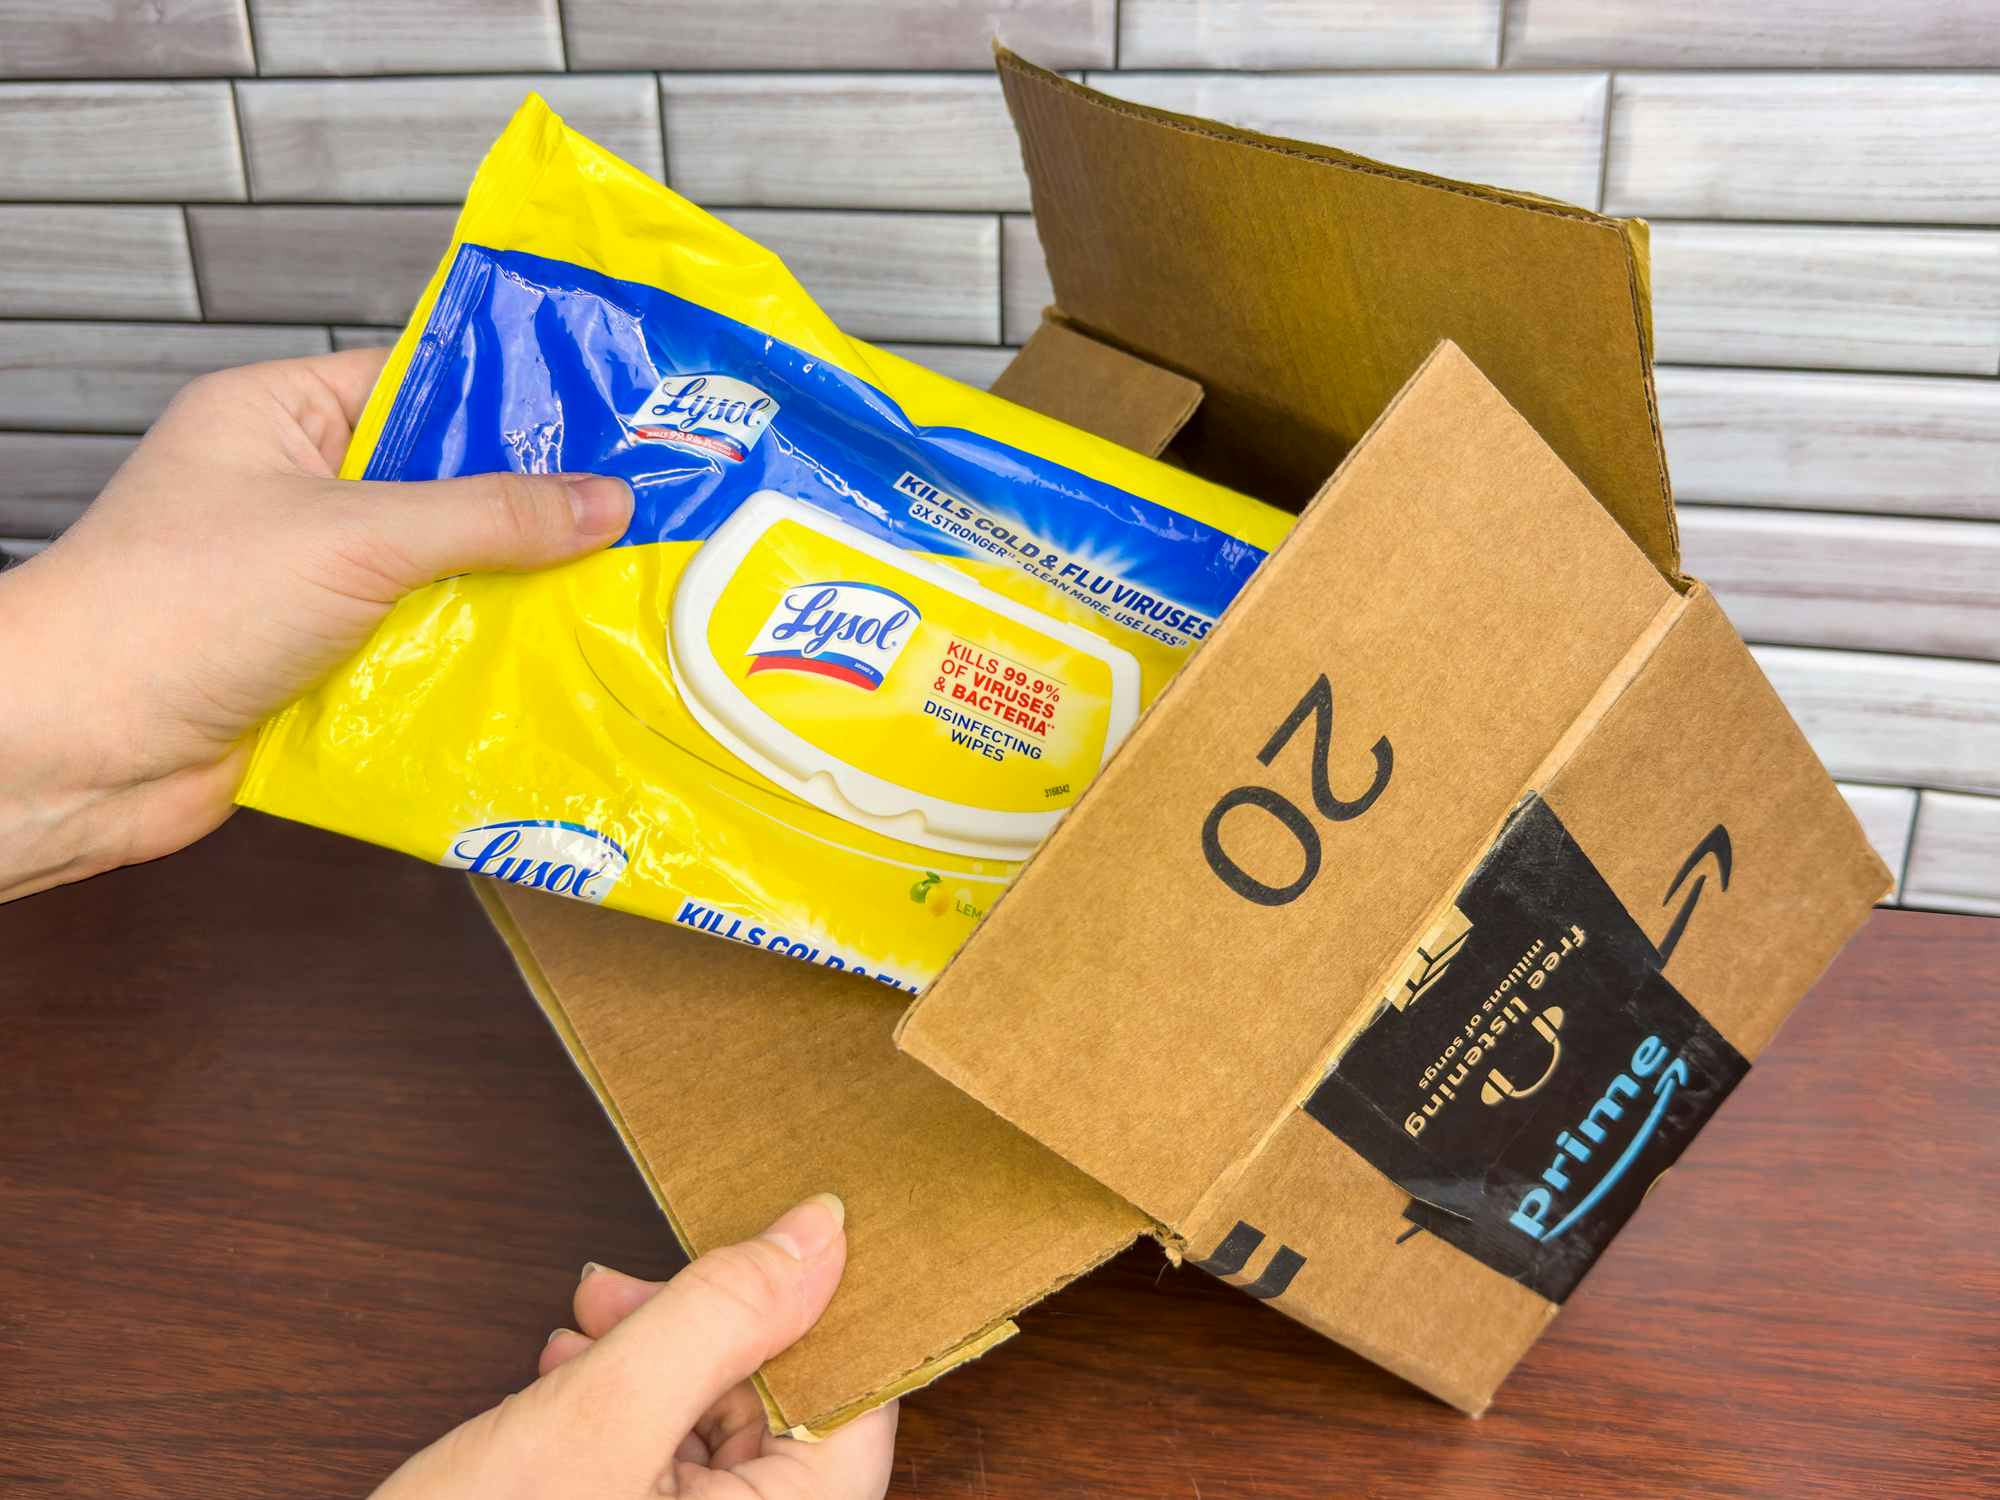 Someone pulling some Lysol wipes out of an Amazon box